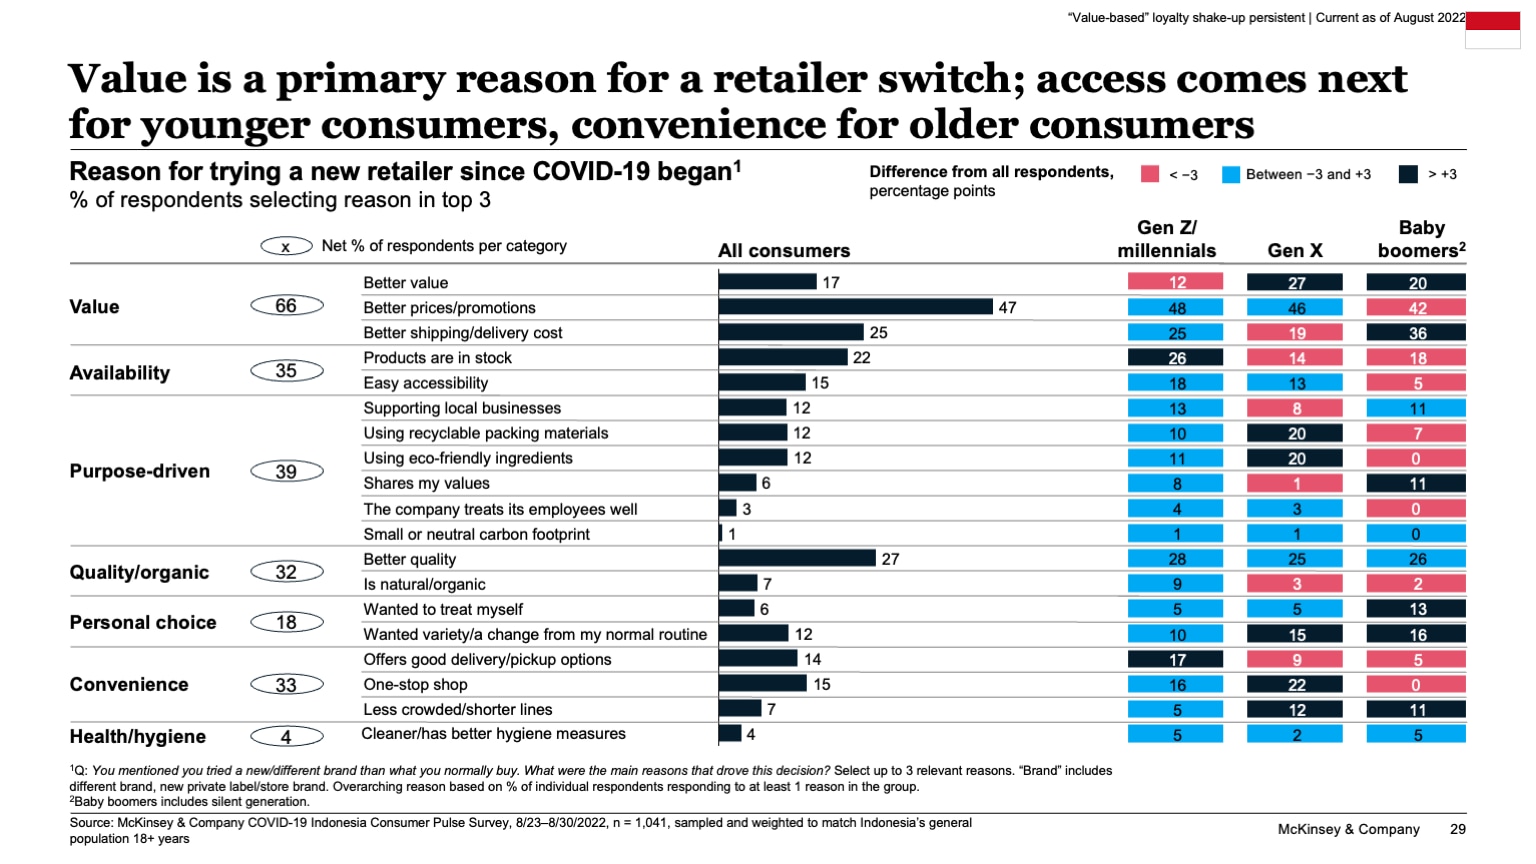 Value is a primary reason for a retailer switch; access comes next for younger consumers, convenience for older consumers